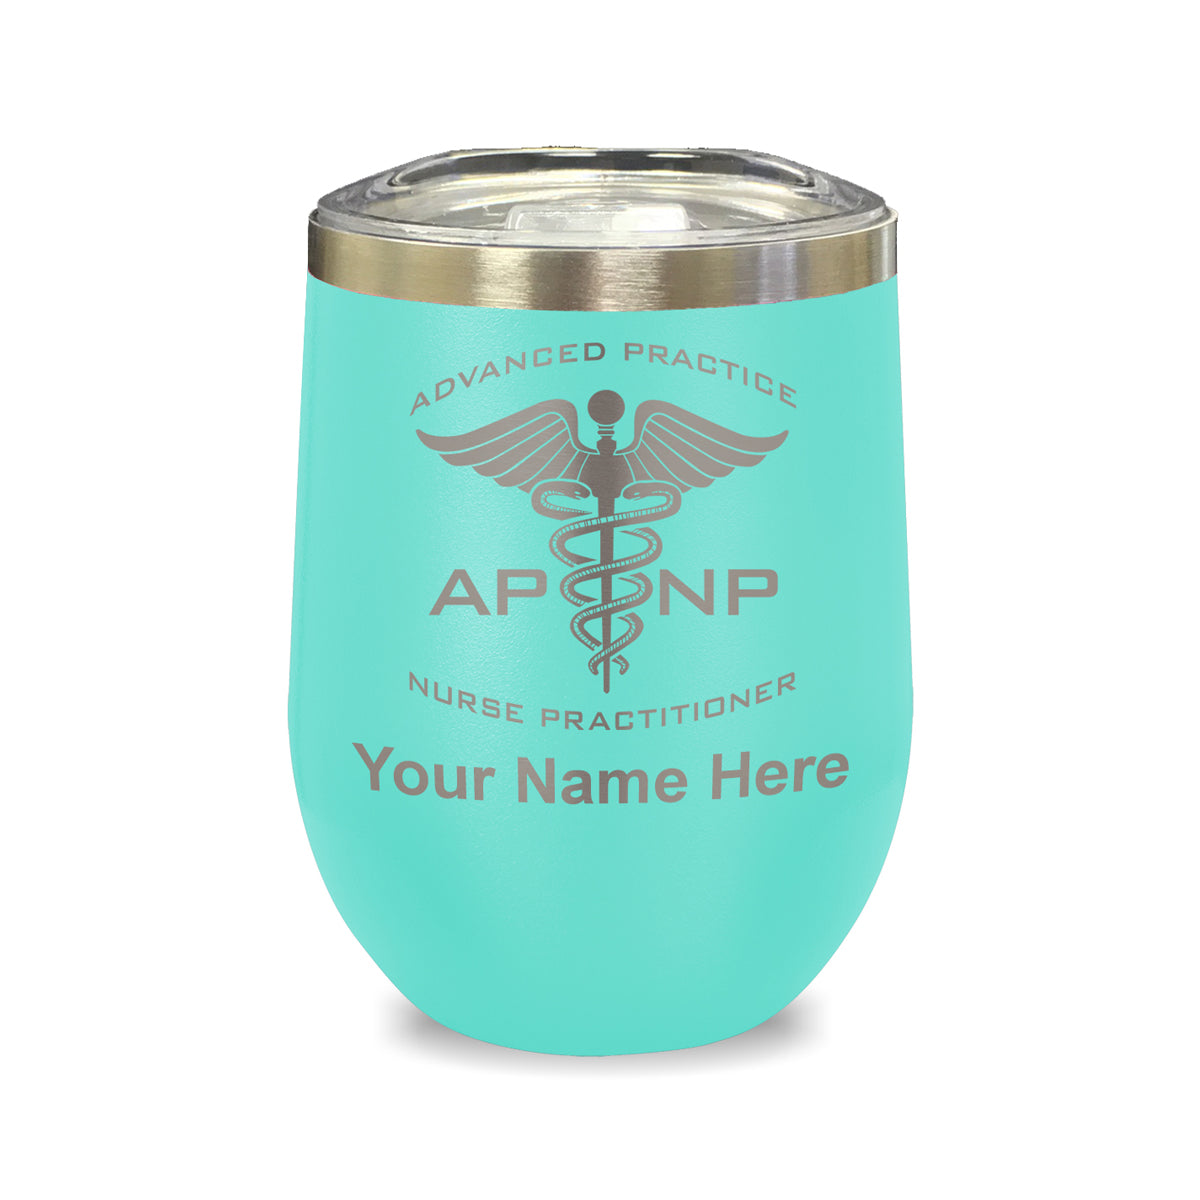 LaserGram Double Wall Stainless Steel Wine Glass, APNP Advanced Practice Nurse Practitioner, Personalized Engraving Included